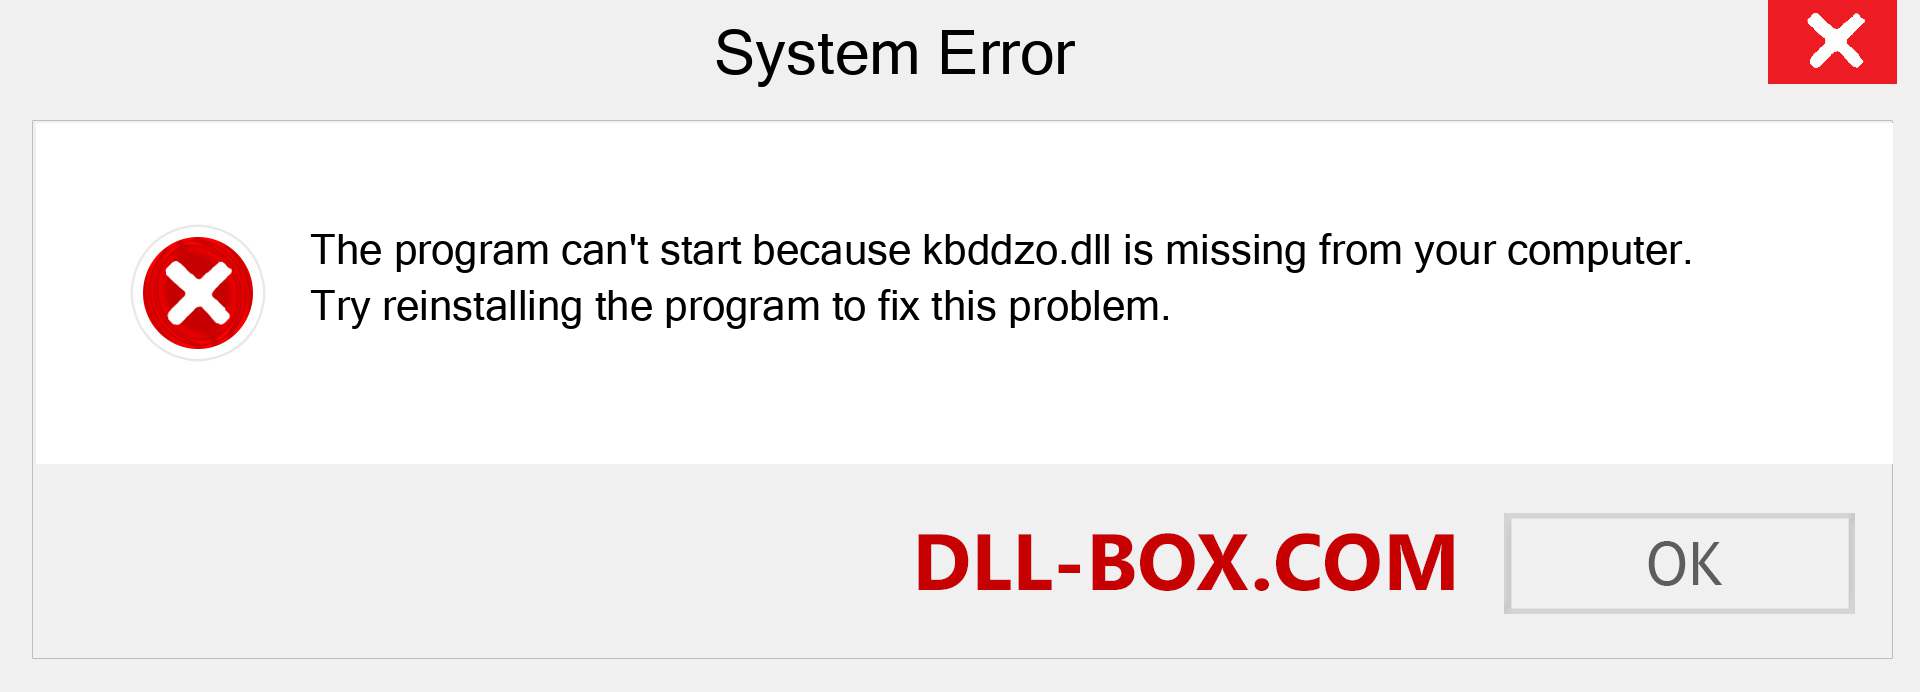  kbddzo.dll file is missing?. Download for Windows 7, 8, 10 - Fix  kbddzo dll Missing Error on Windows, photos, images